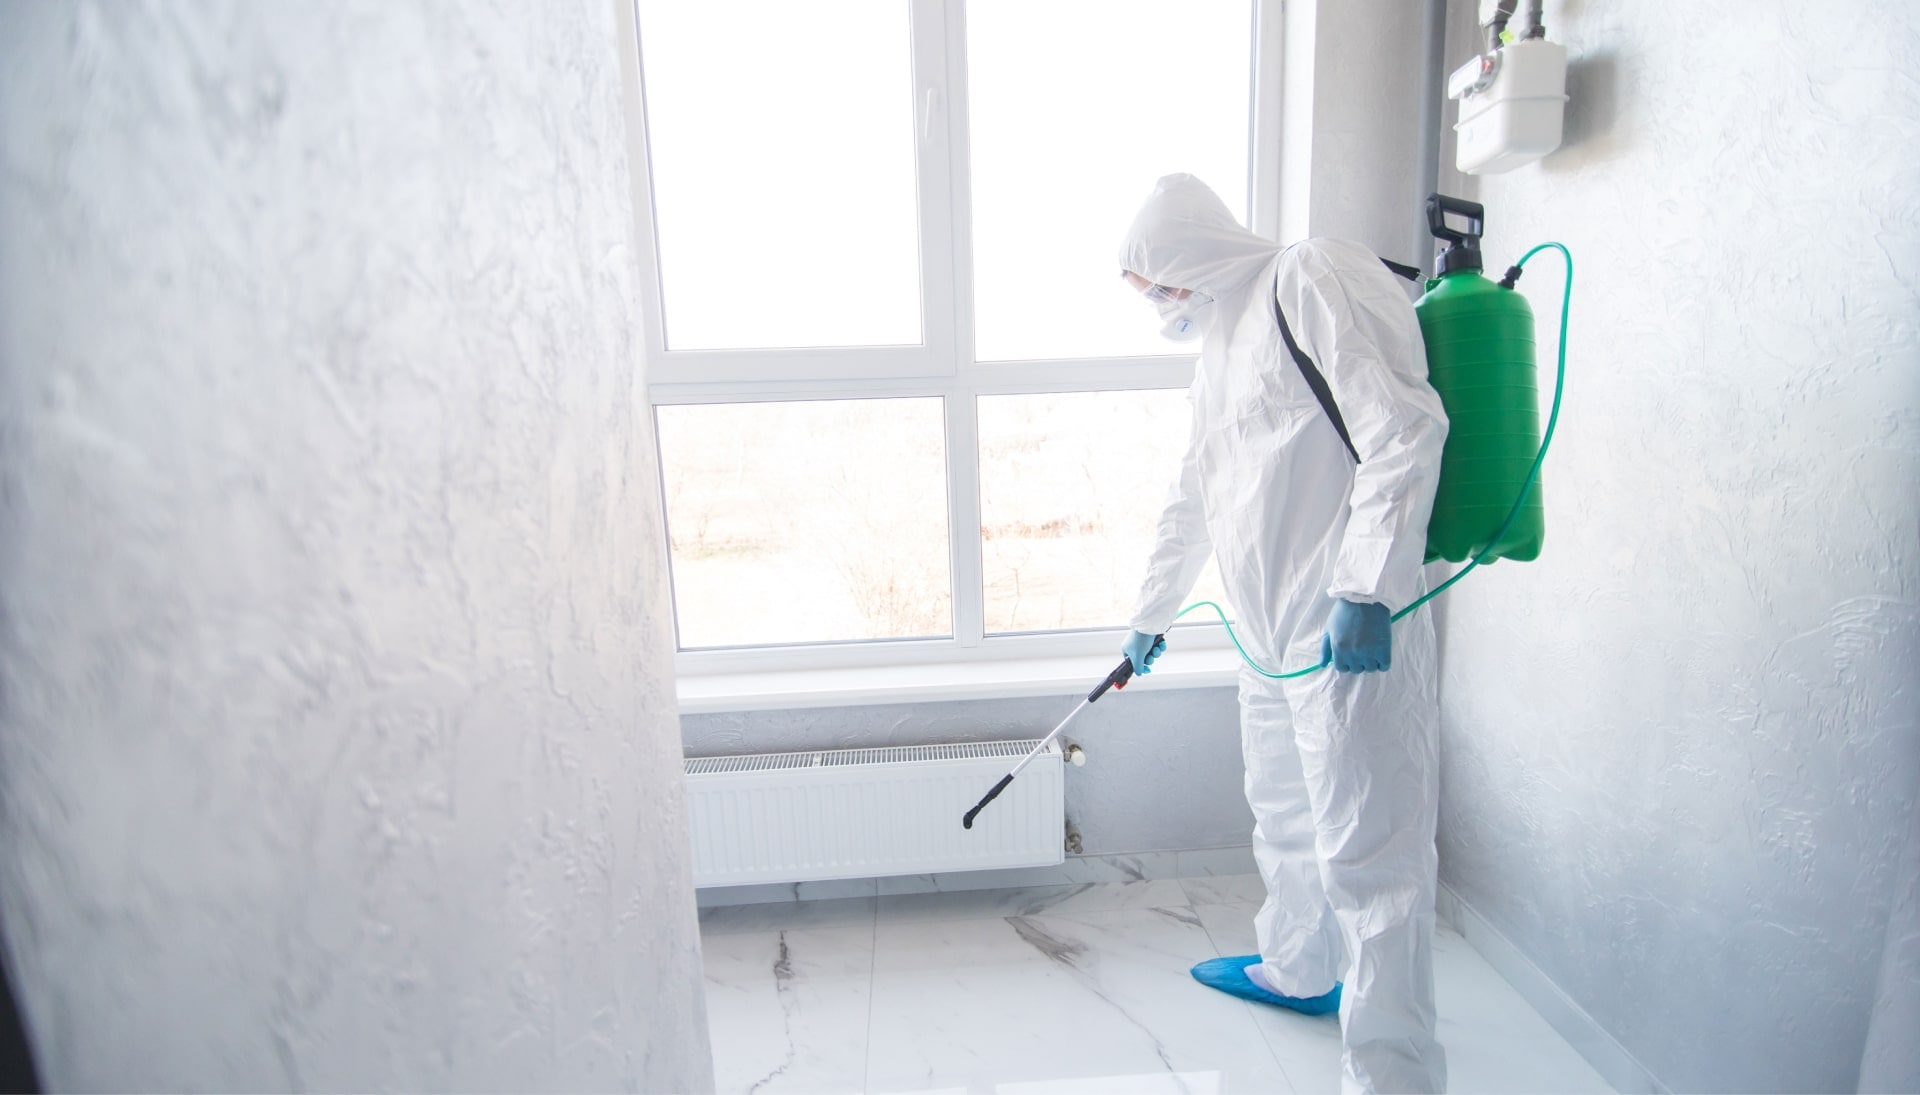 We provide the highest-quality mold inspection, testing, and removal services in the Memphis, Tennessee area.